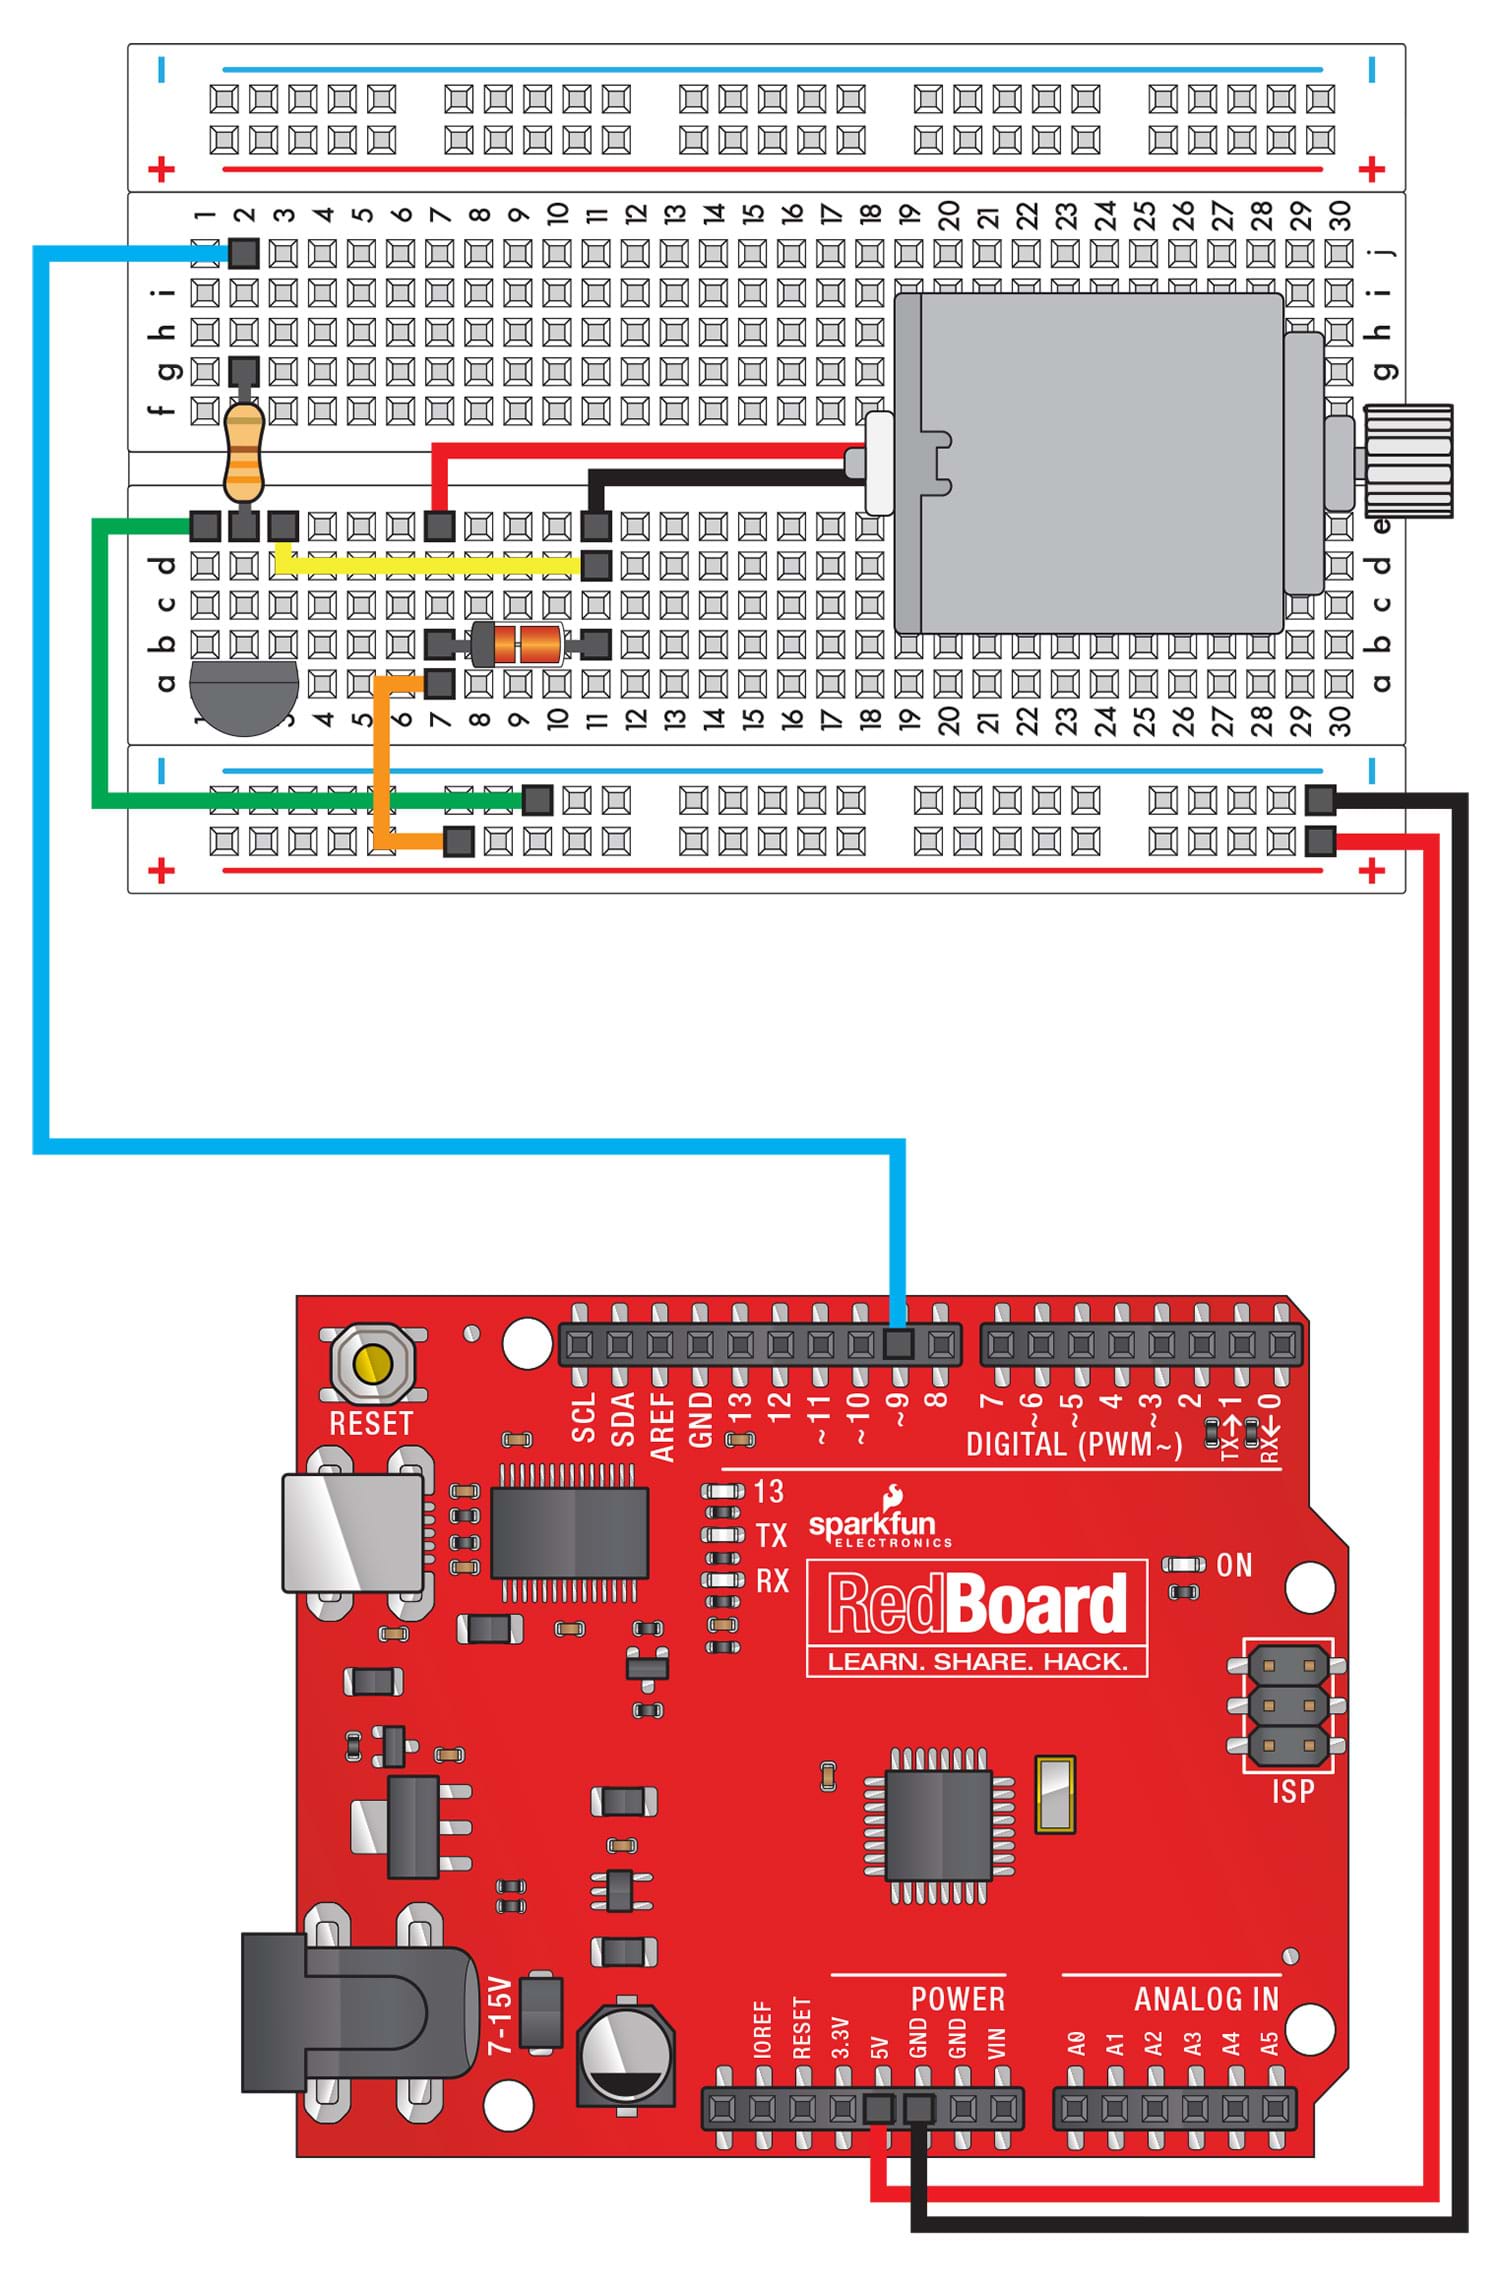 A schematic diagram shows a breadboard and the location of wires to Arduino pin 9, voltage, and ground.